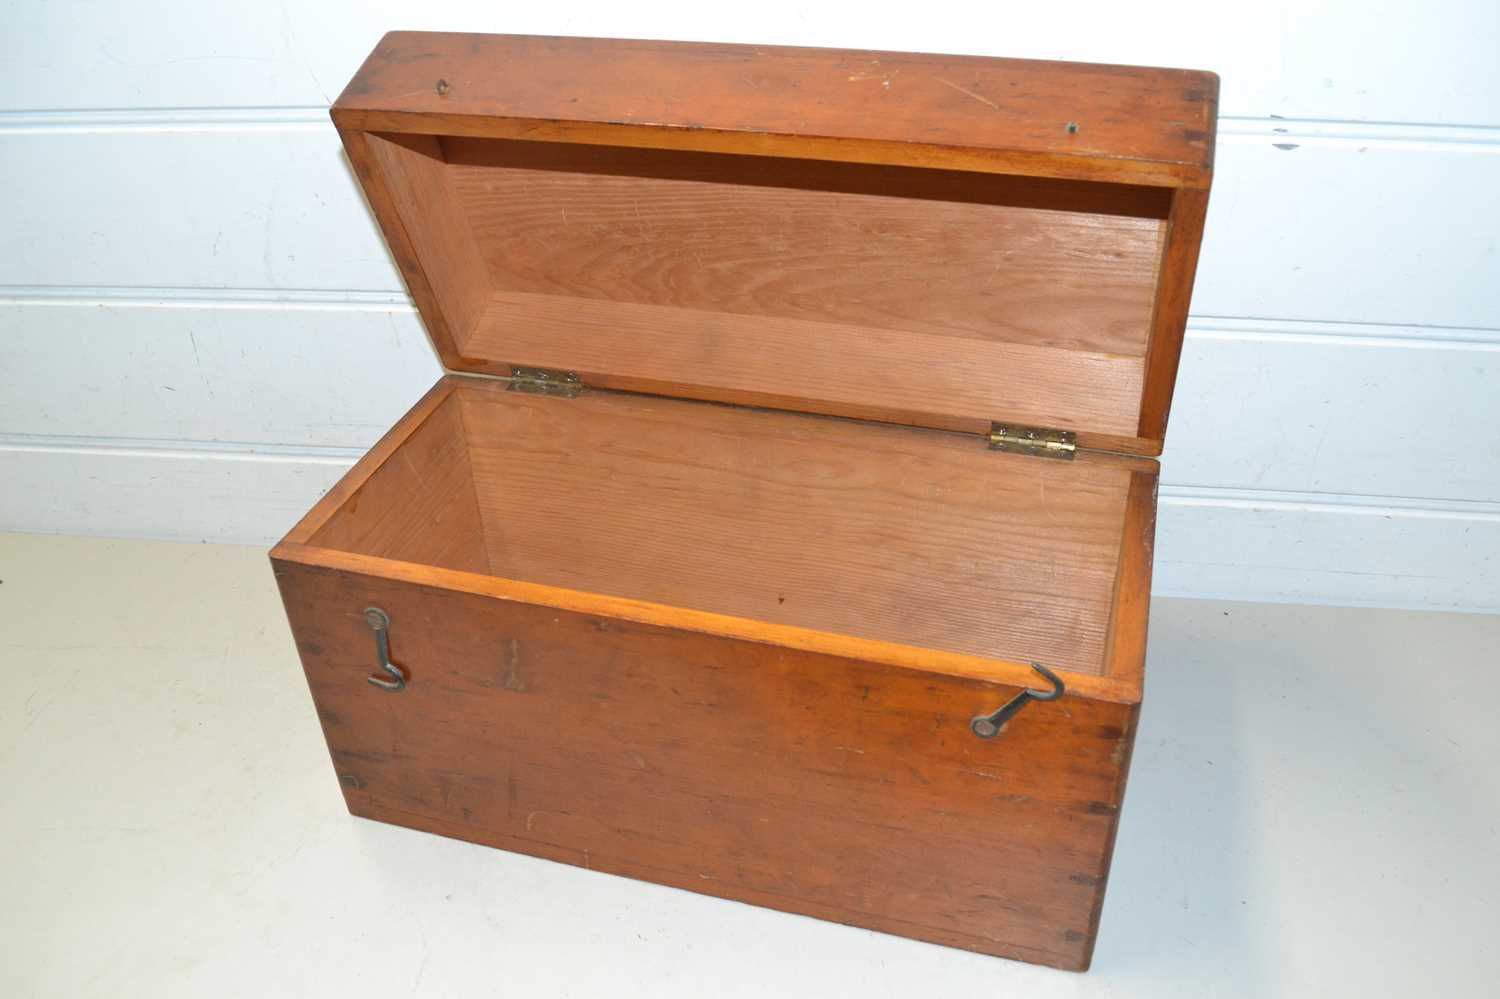 Small early 20th Century hardwood box presumably for a scientific instrument - Image 2 of 2